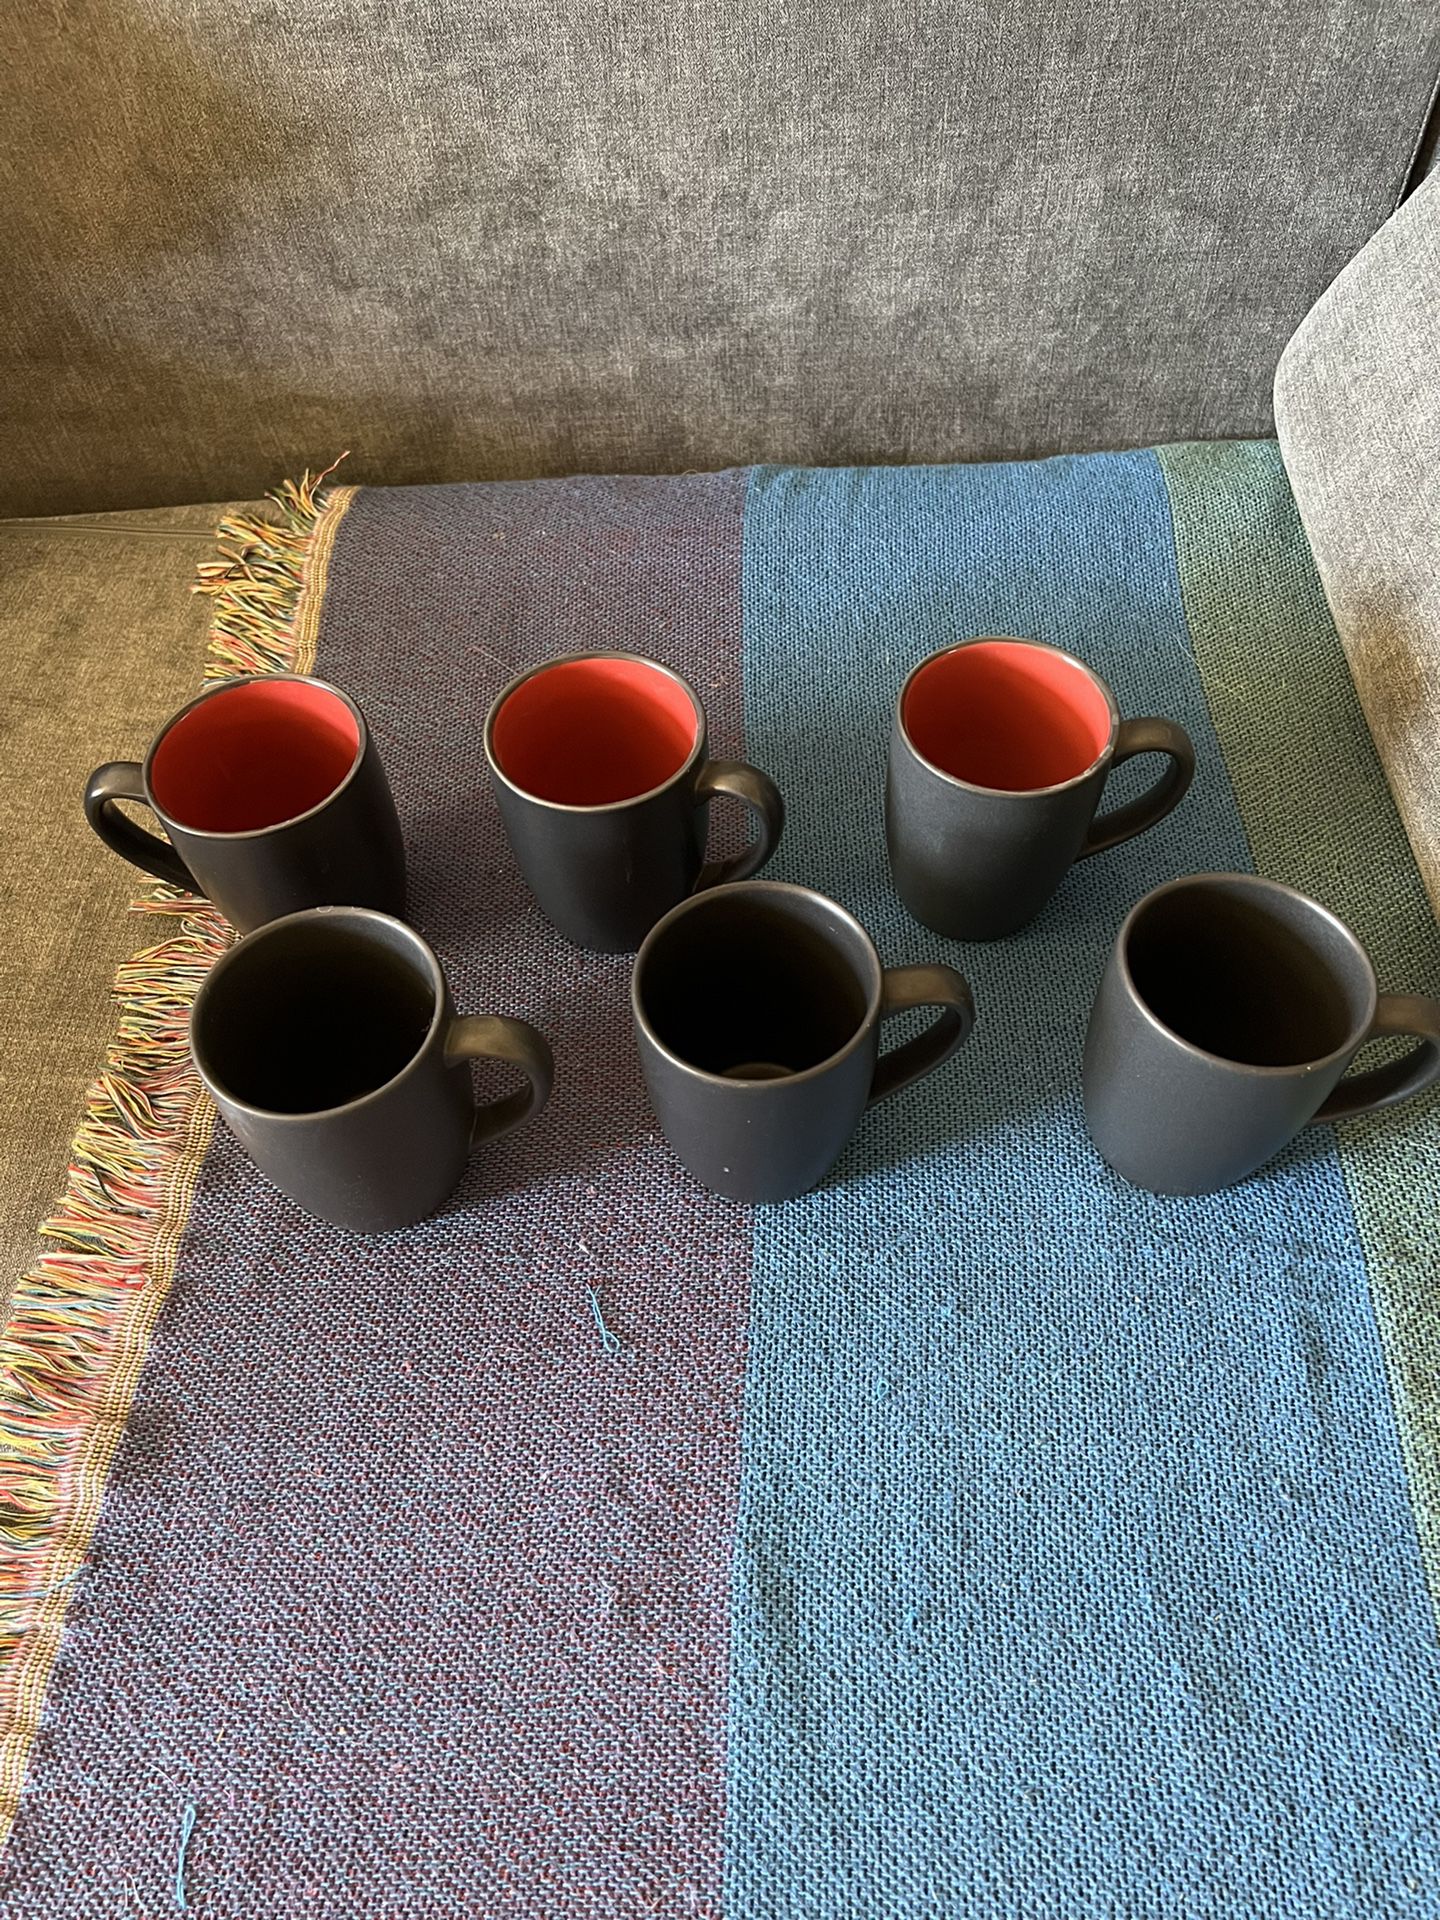 6 Tea Cups Coffee Mugs Cup Red And Black Asian Style 